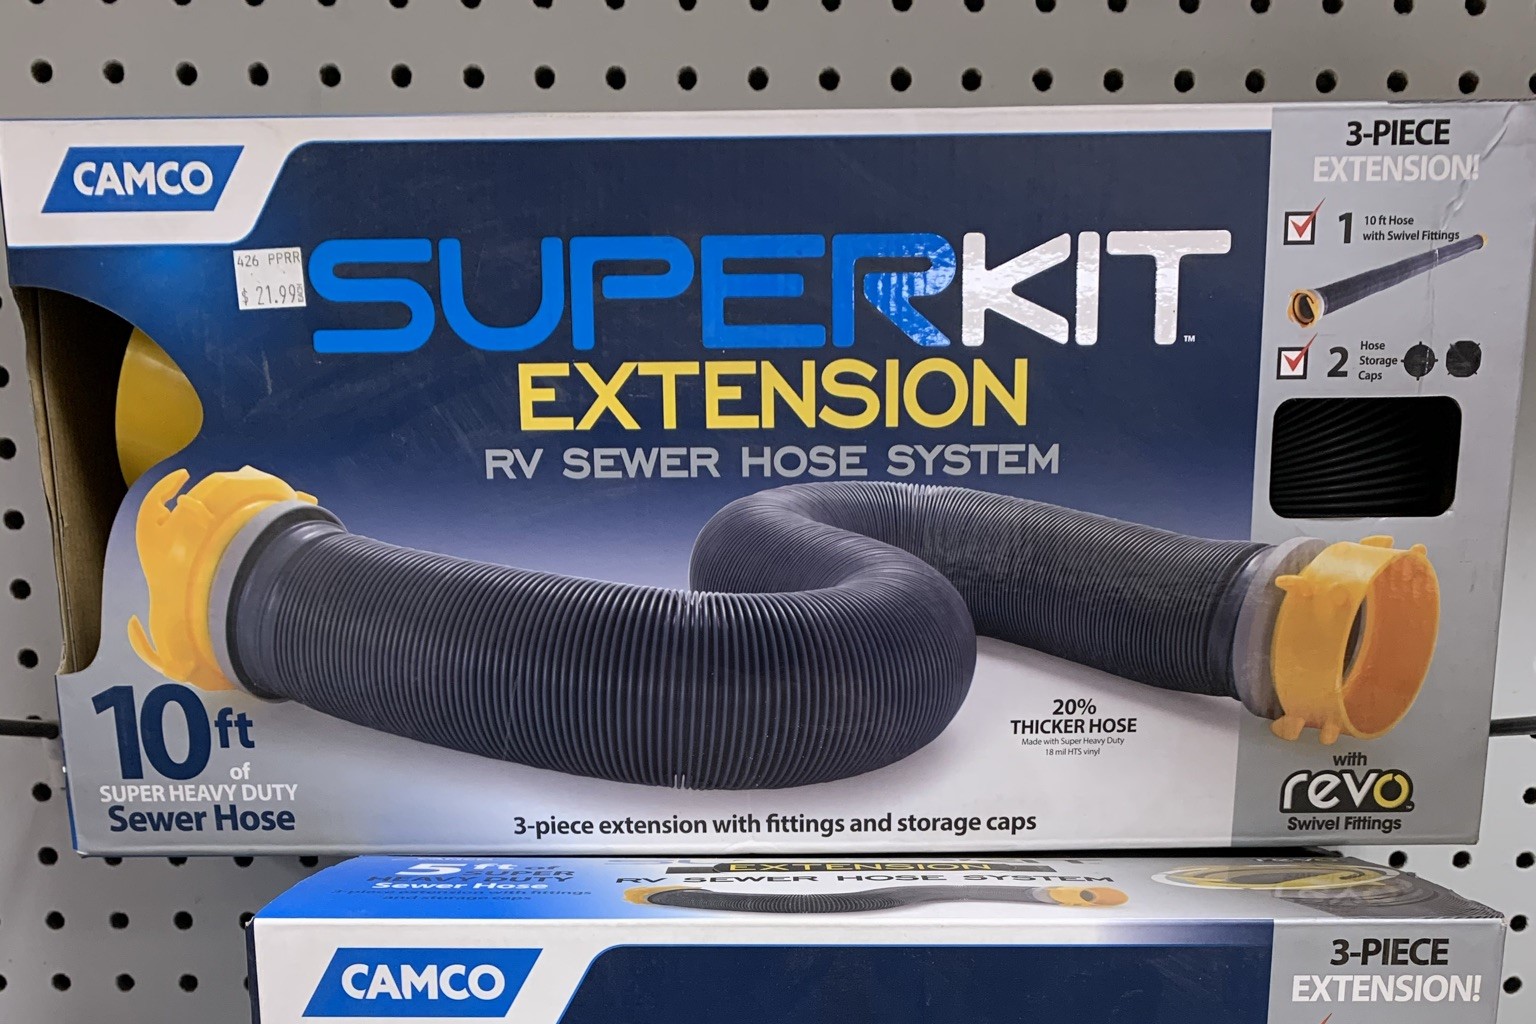 An RV Sewer Hose Extension by Camco